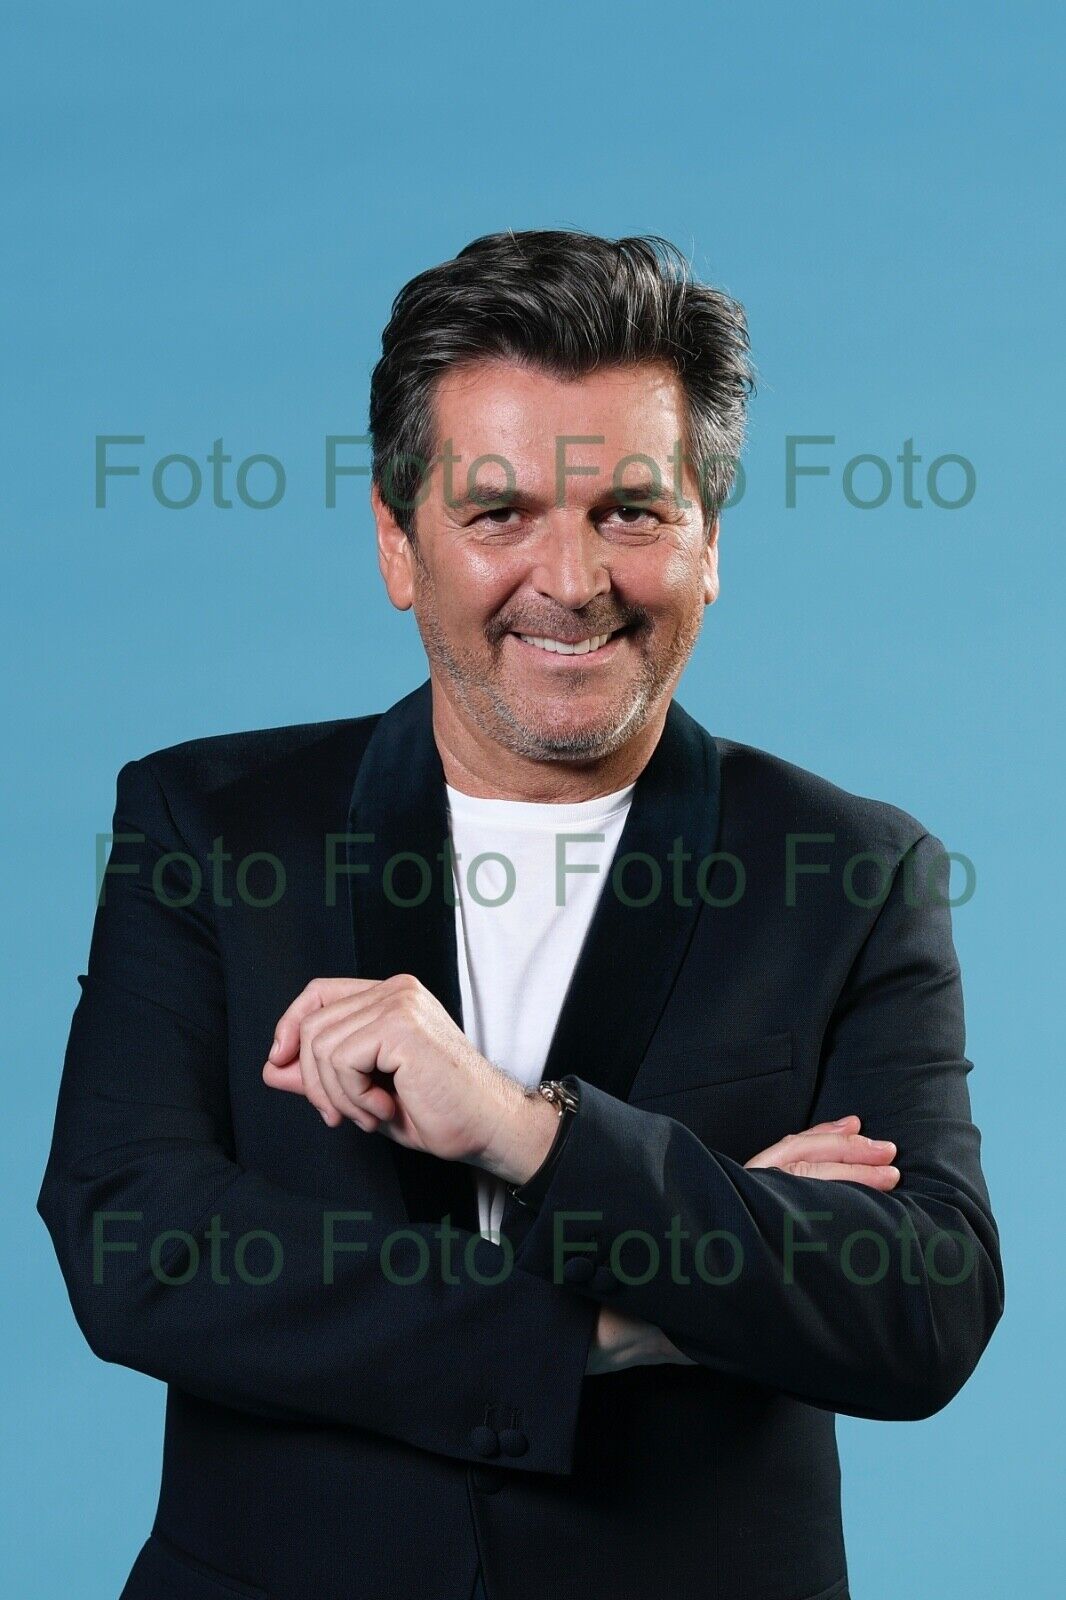 Thomas Anders Pop Songs Pop Music Photo Poster painting 20 X 30 CM Without Autograph (Be-10